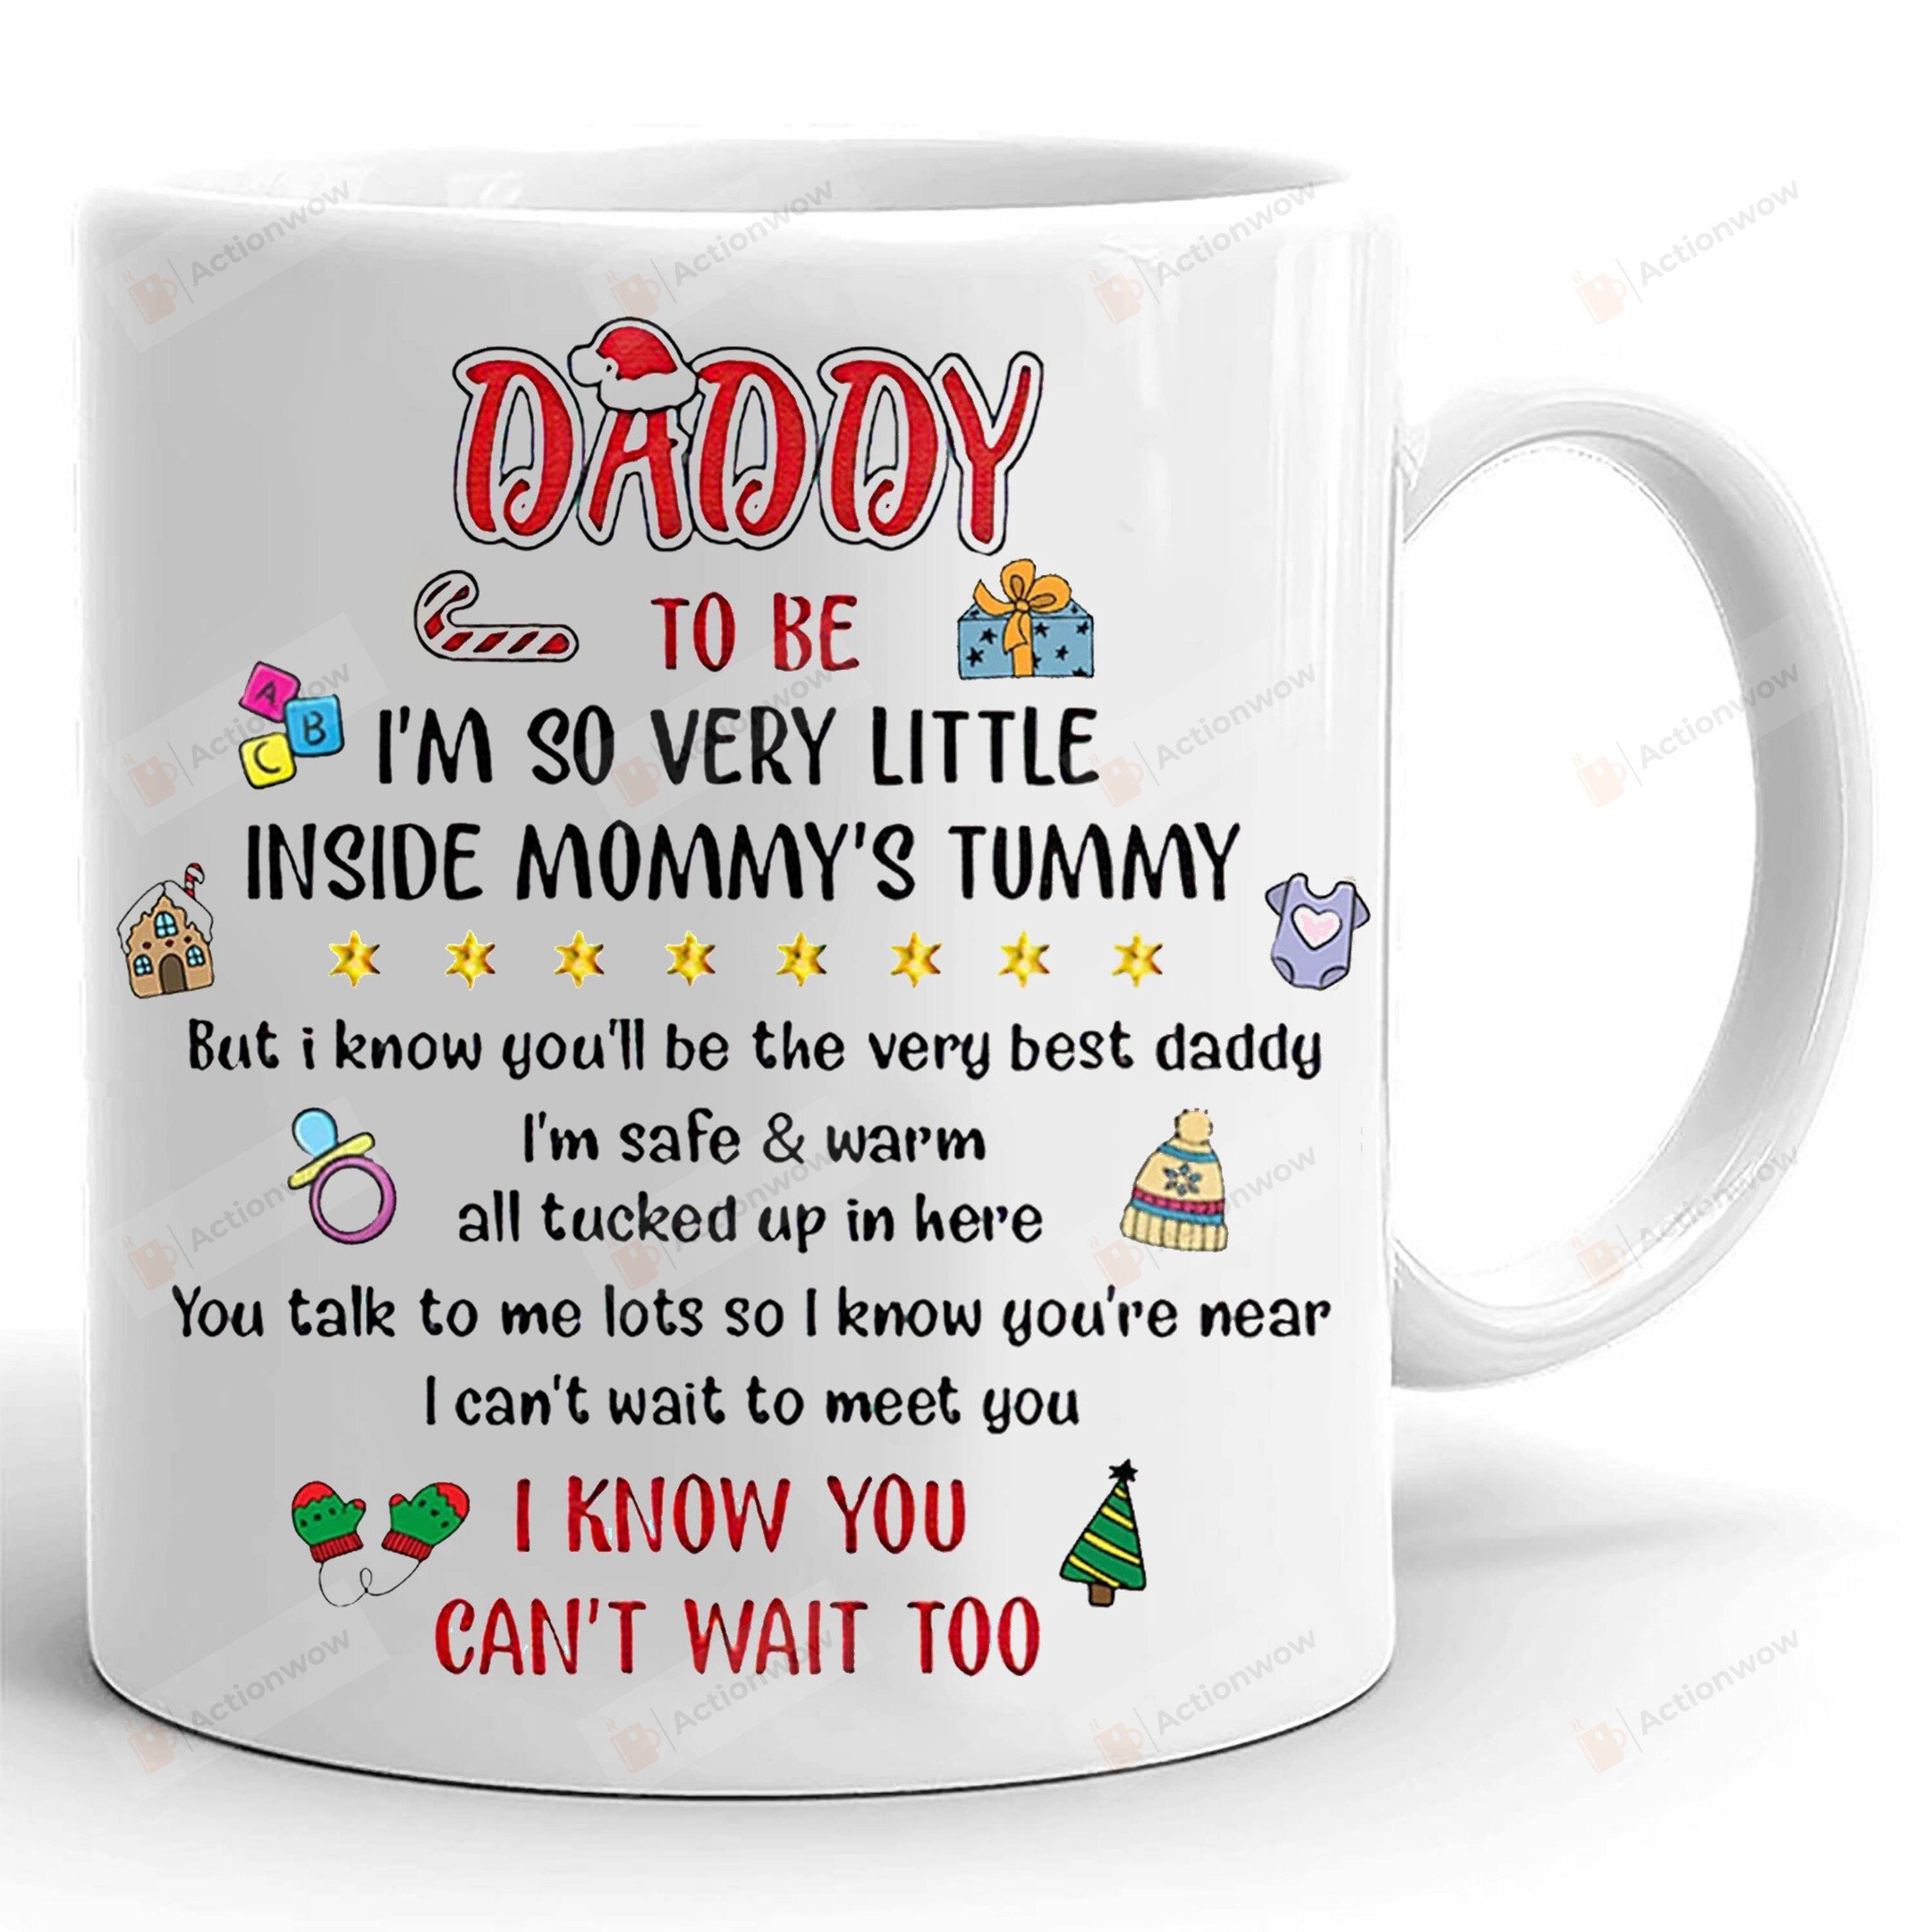 Daddy To Be I'm So Very Little Inside Mommys Tummy Mug Gifts For Daddy To Be, Baby Announcement